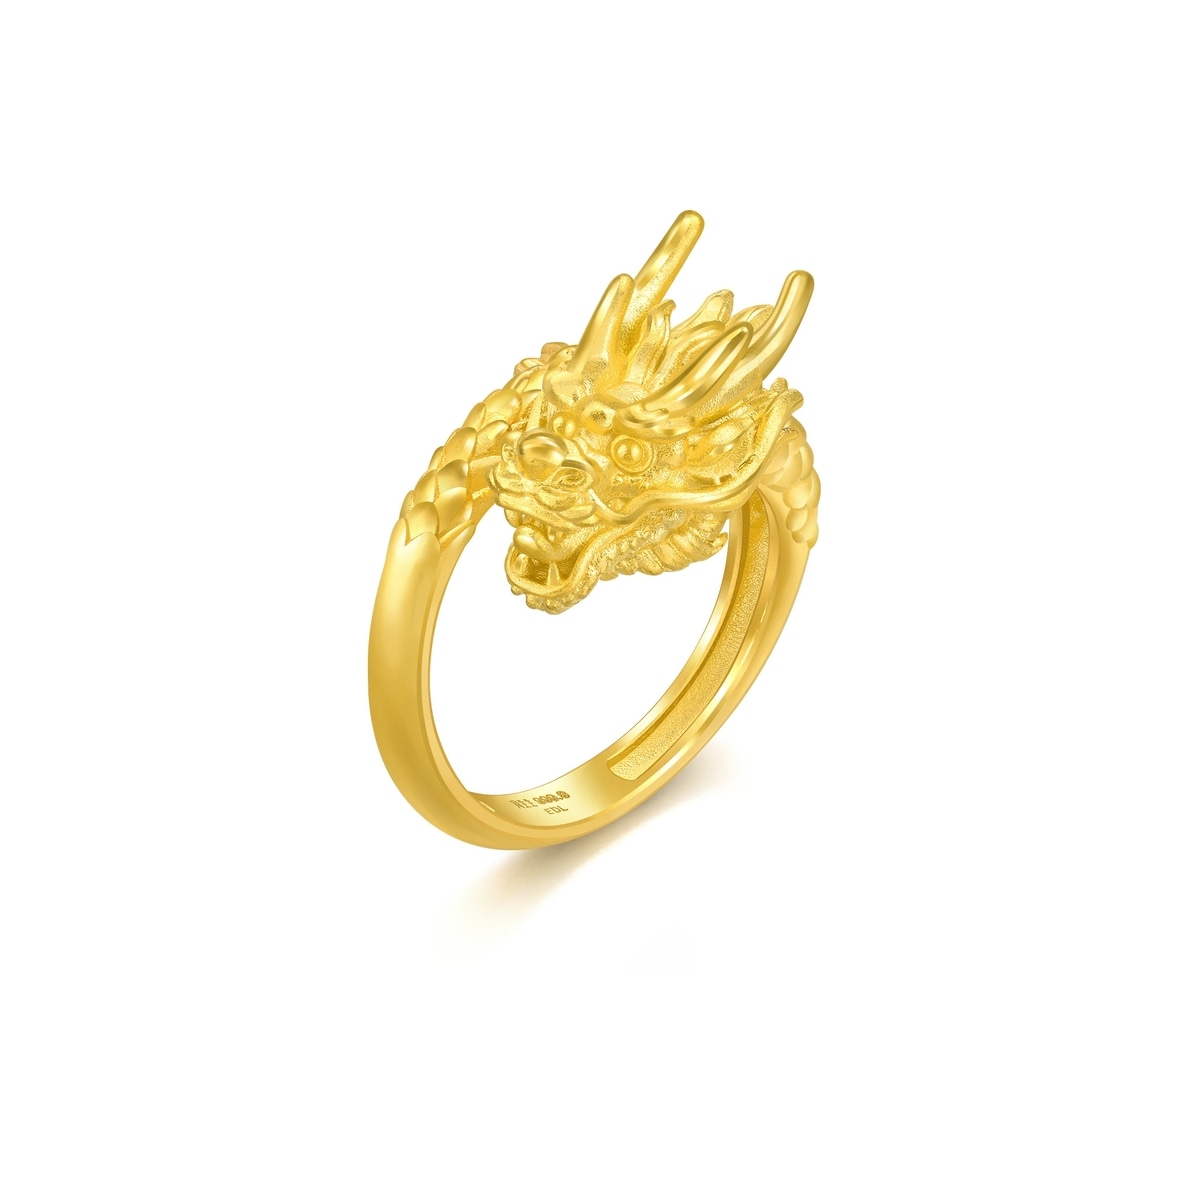 Chinese Wedding Collection 999.9 Gold Ring - 94542R | Chow Sang Sang ...